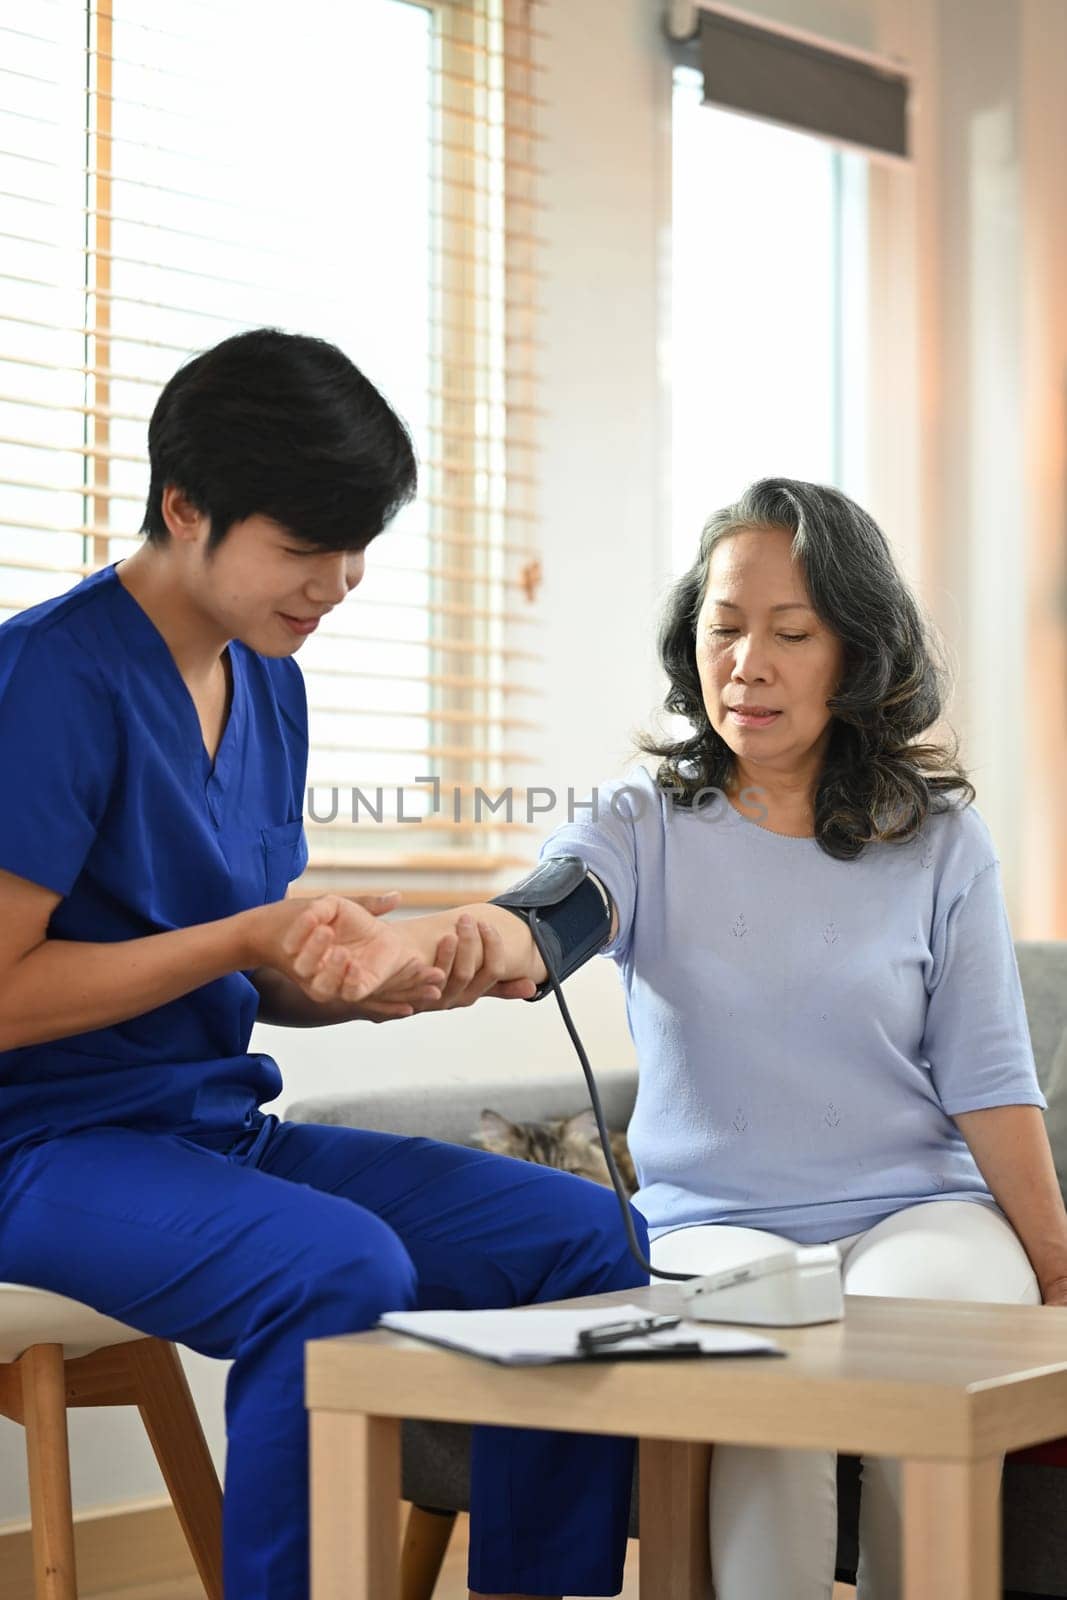 Health visitor measuring blood pressure middle age woman during home visit. Healthcare and Home health care service concept.